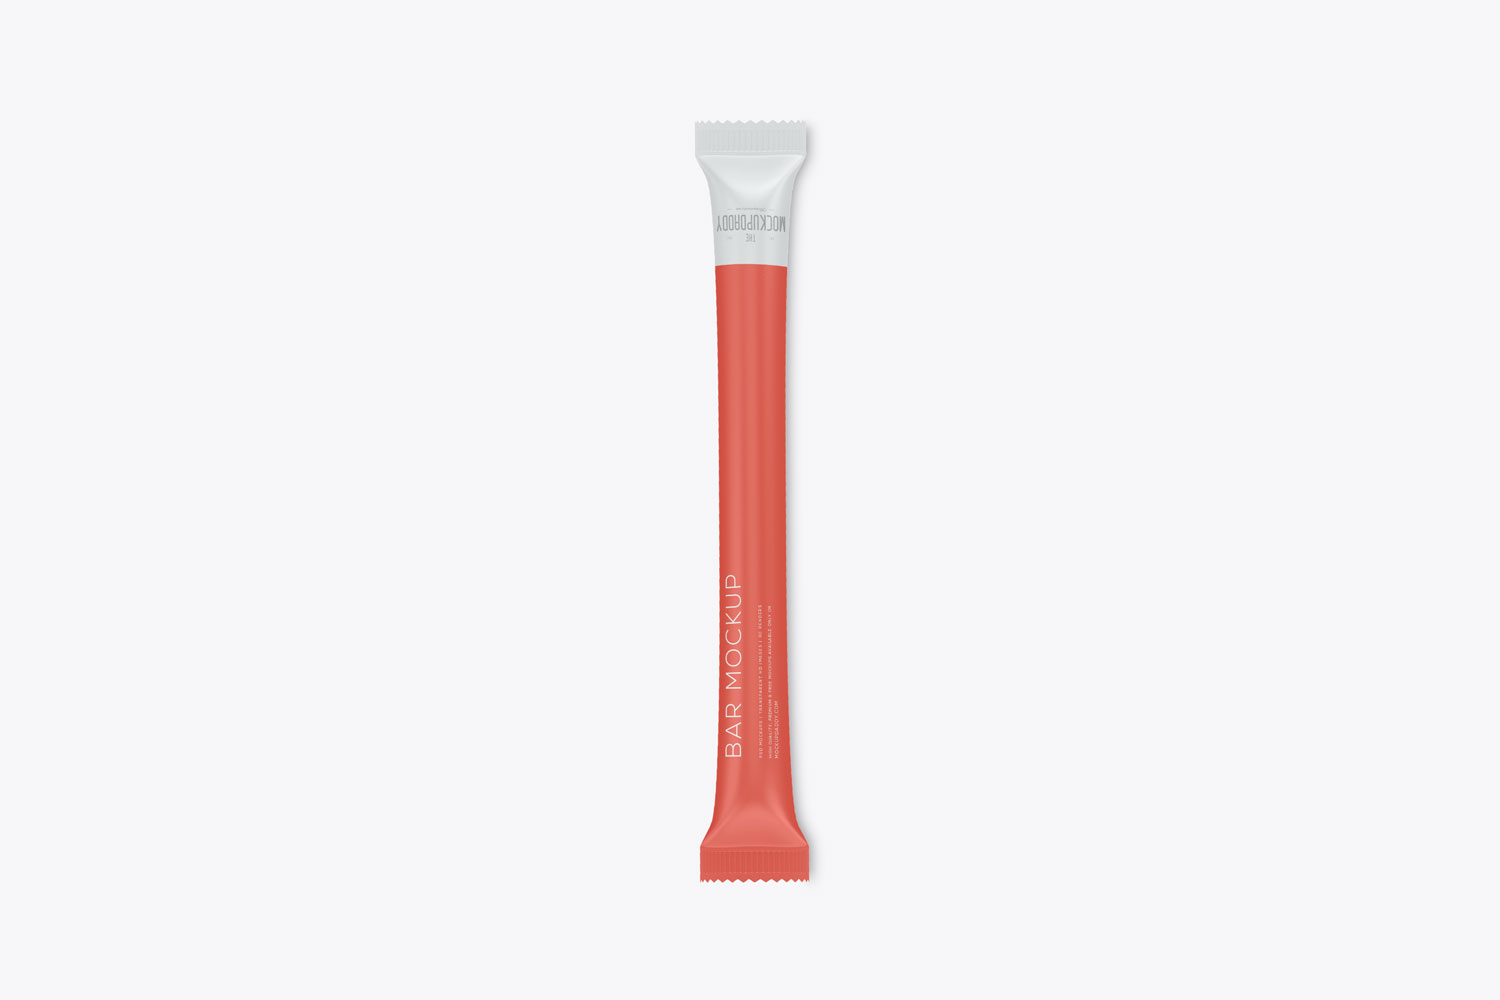 Long Stick Sachet PSD Mockup in white and red color.